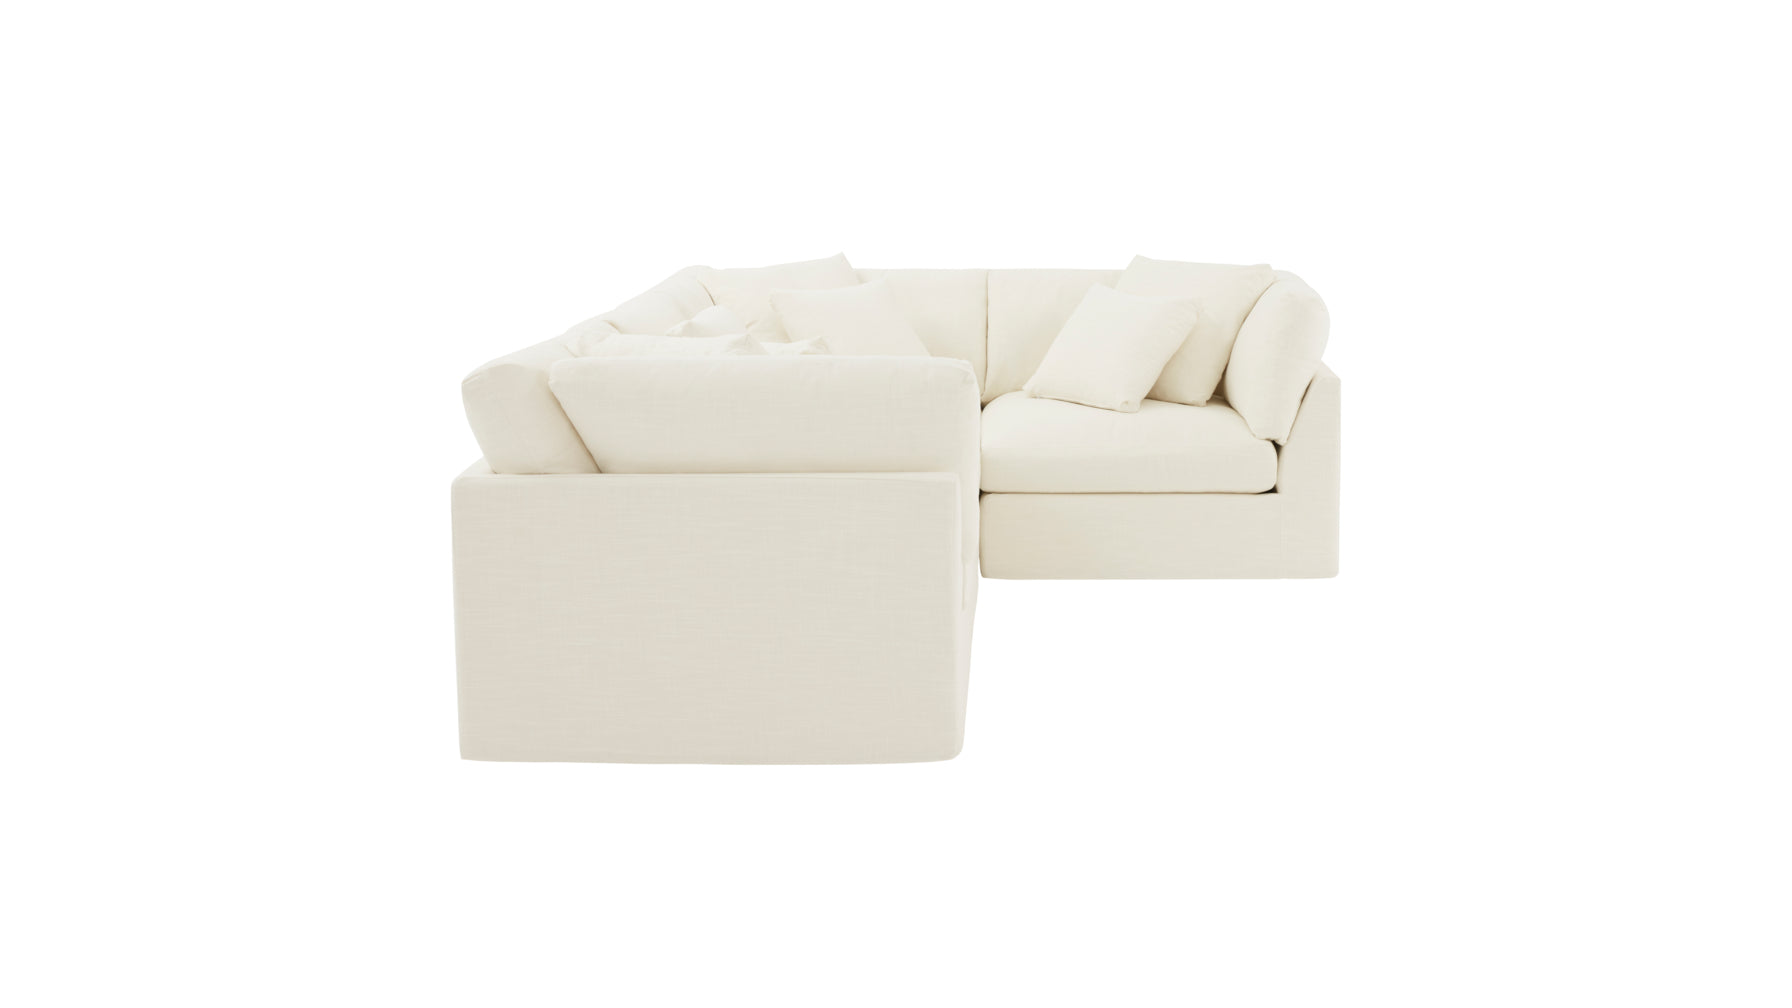 Get Together™ 4-Piece Modular Sectional Closed, Large, Cream Linen - Image 5